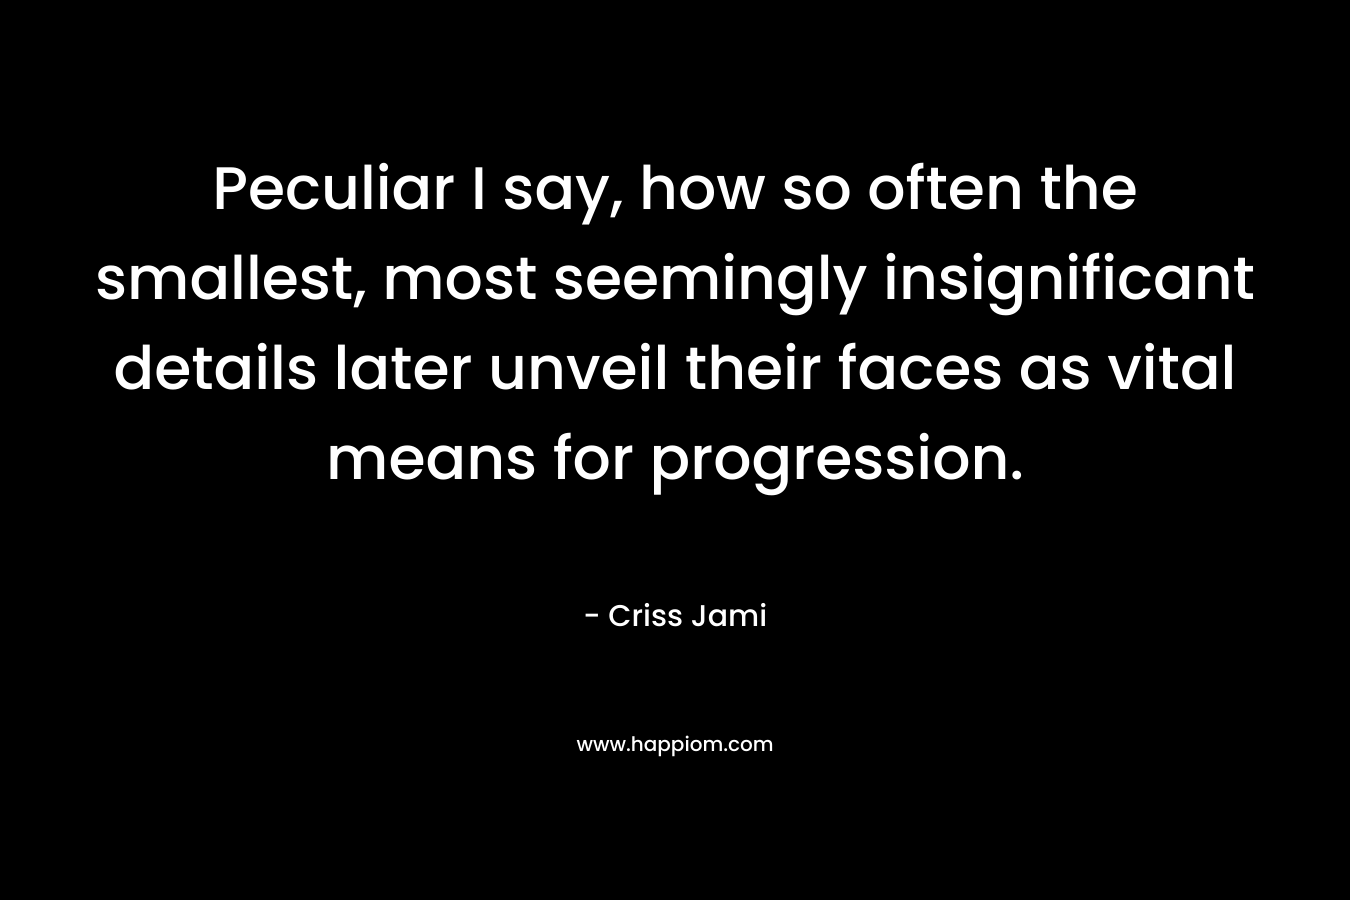 Peculiar I say, how so often the smallest, most seemingly insignificant details later unveil their faces as vital means for progression. – Criss Jami